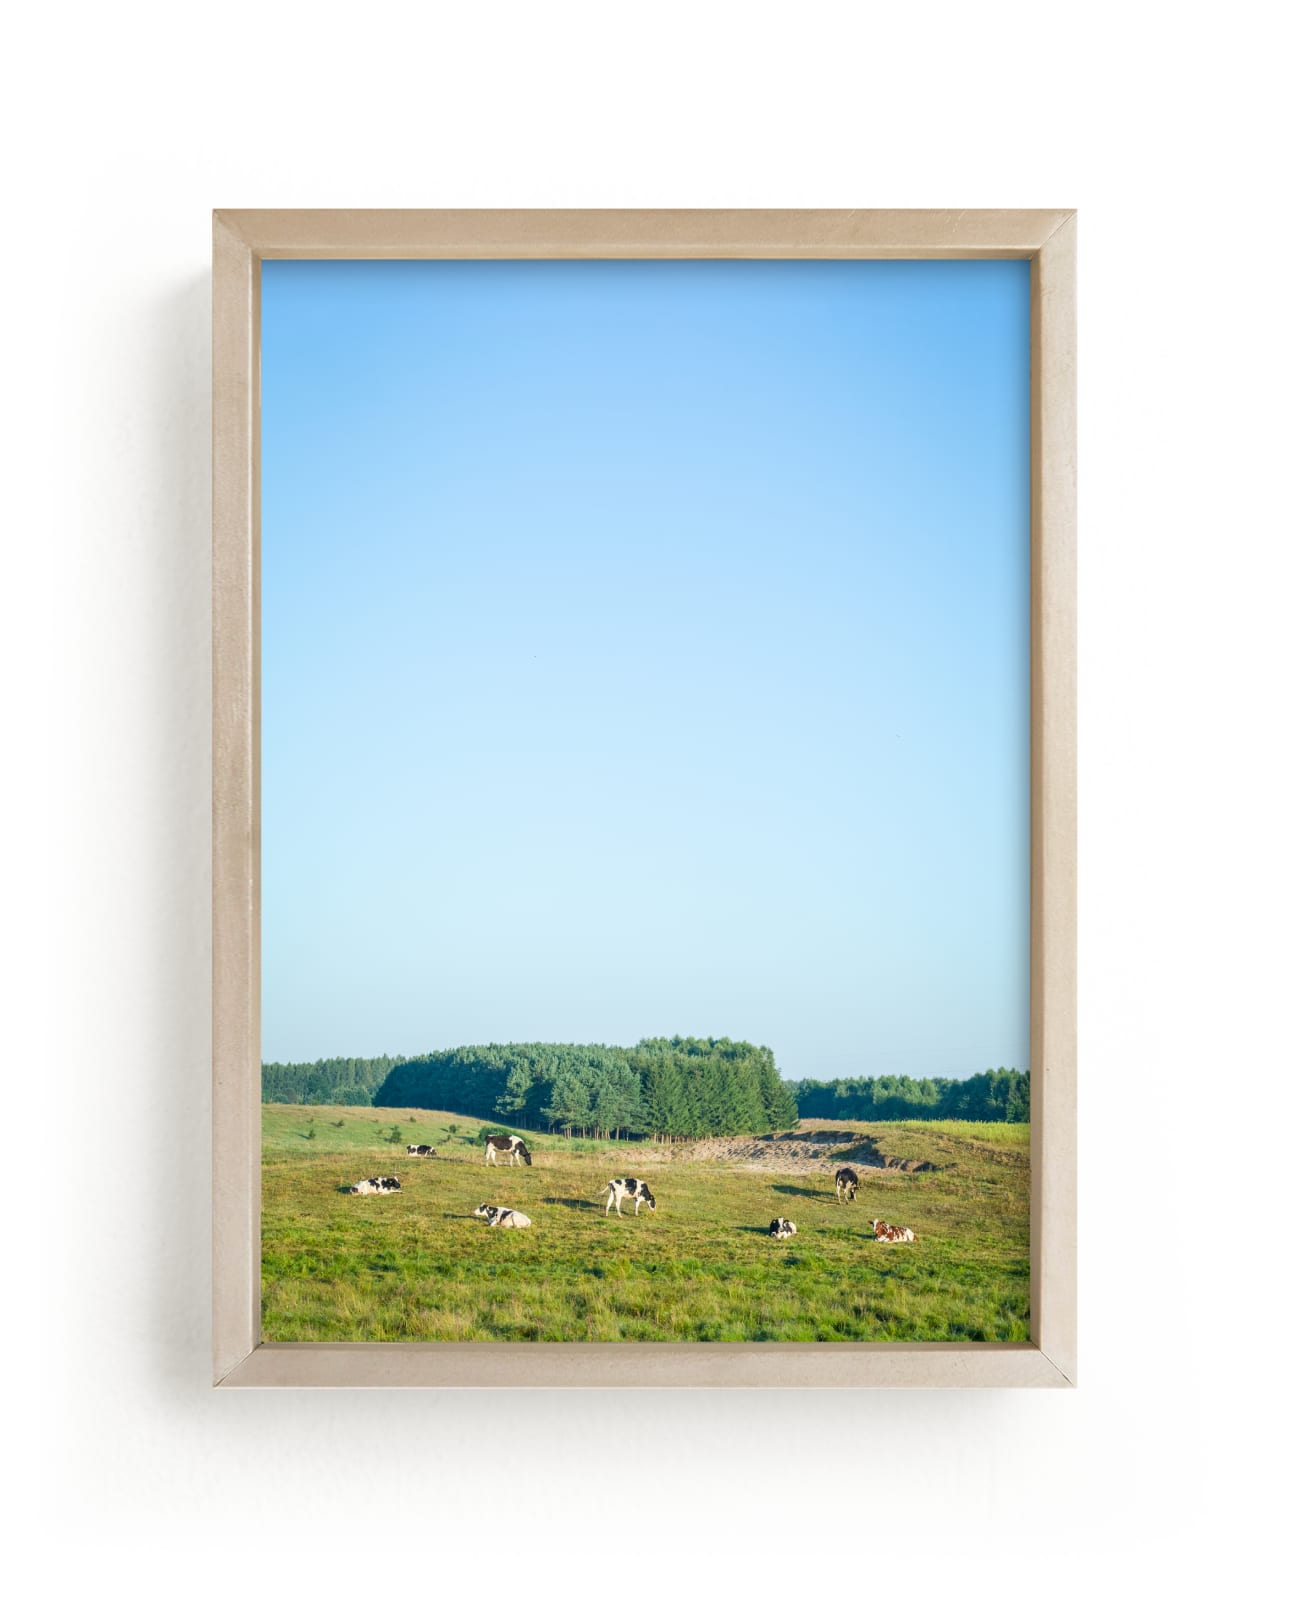 "Pasture of cows" by Lying on the grass in beautiful frame options and a variety of sizes.